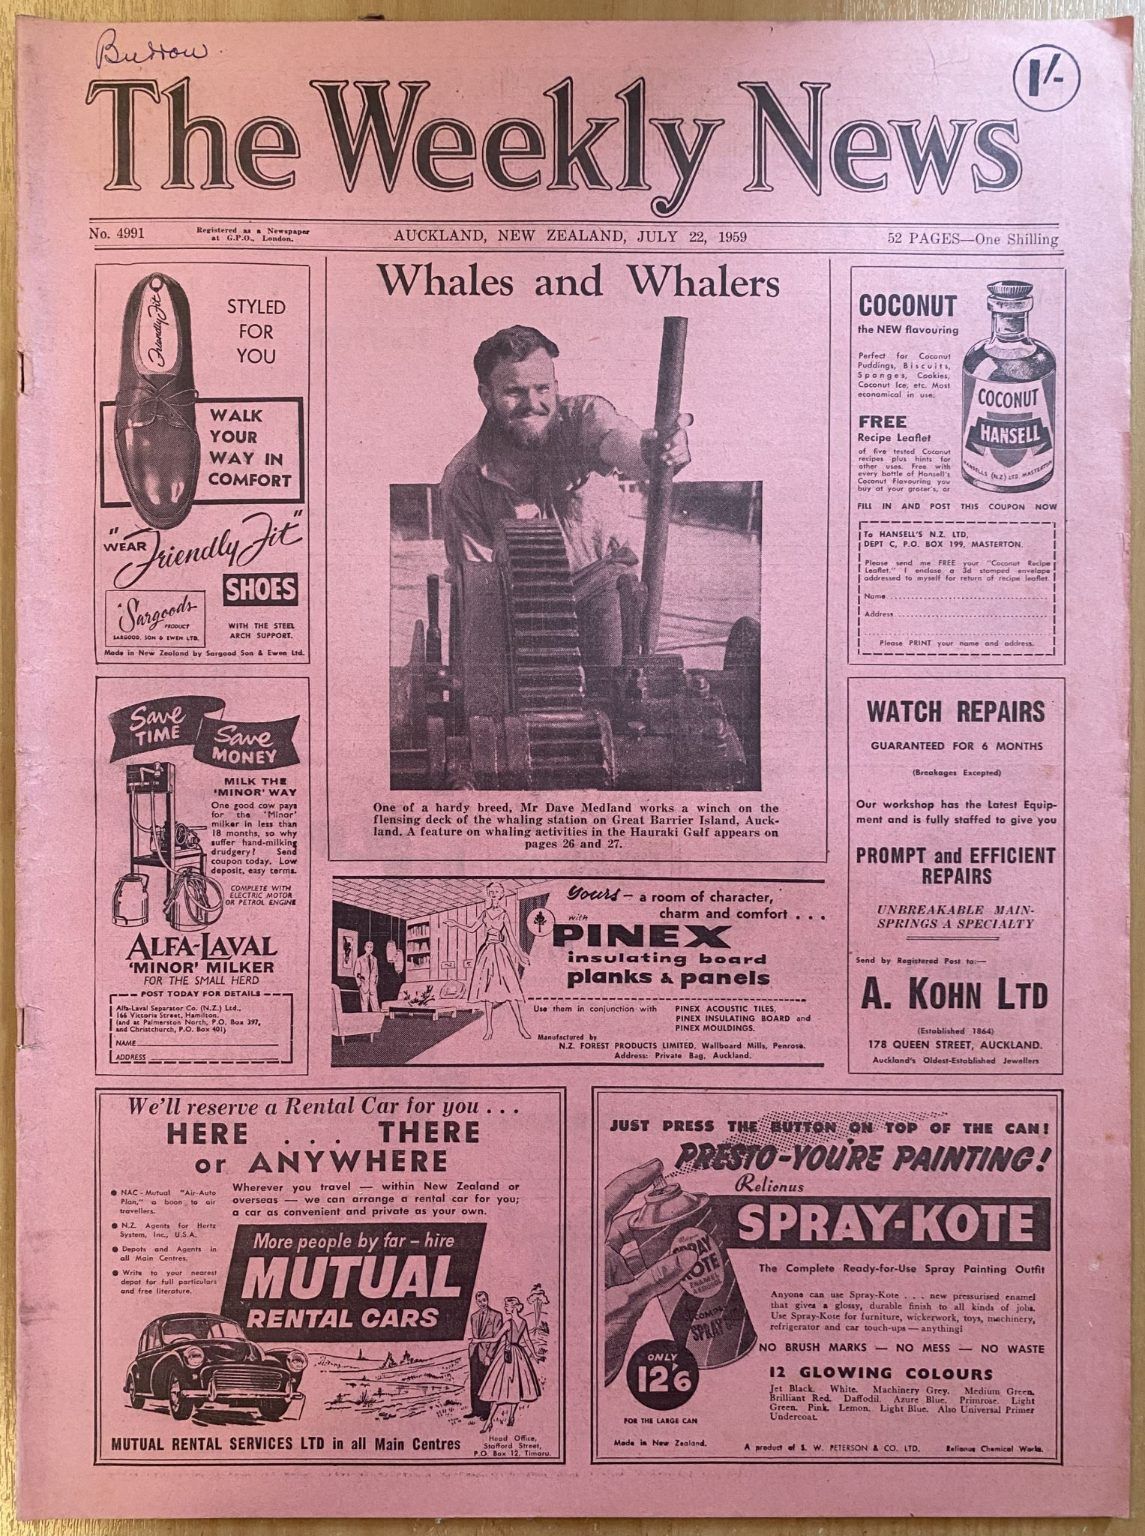 OLD NEWSPAPER: The Weekly News - No. 4991, 22 July 1959